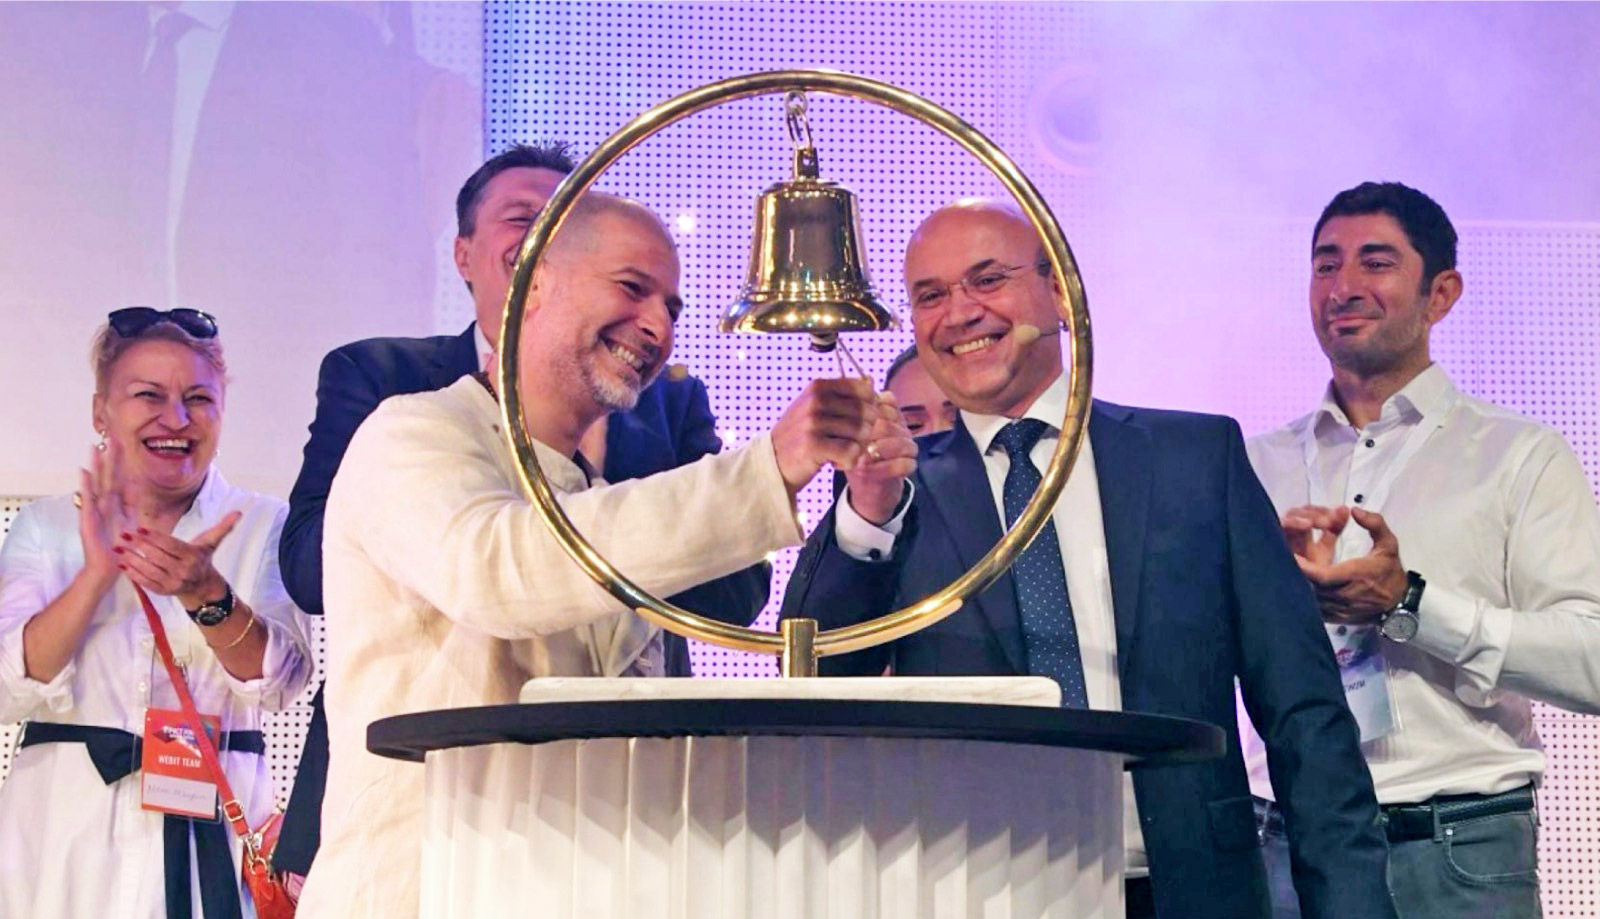 Plamen Russev, alongside Professor Manyu Muravenov, Ivailo Slavov, Ivo Evgeniev, and others, rang the bell to mark the start of trading for the Webit Investment Network (BSE: WIN) on the stock exchange.